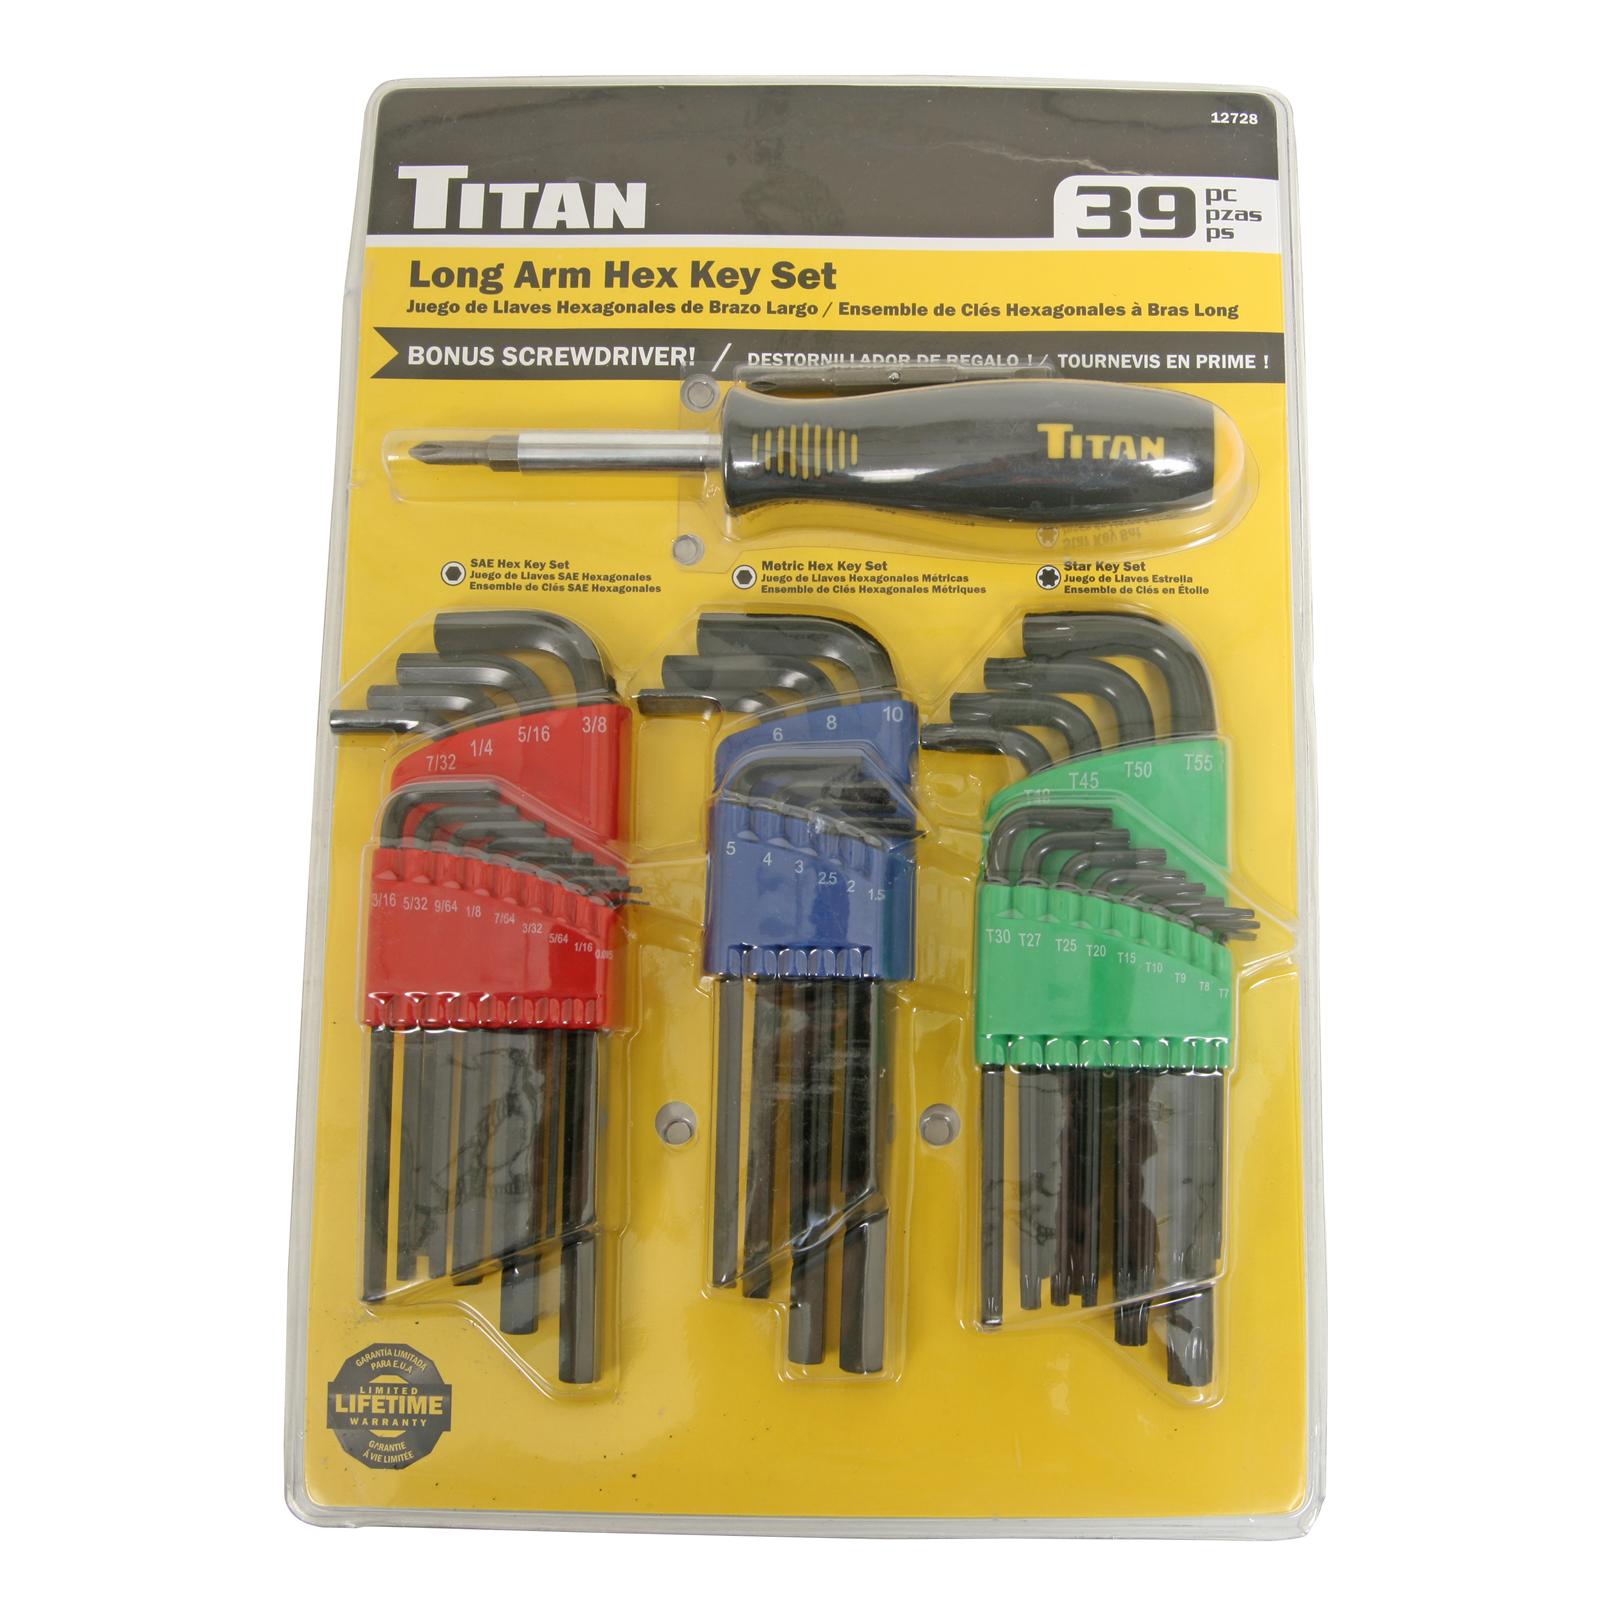 TITAN TOOLS 39 PIECE HEX KEY SET AND SCREWDRIVER WITH INTERCHANGEABLE BITS 12728 